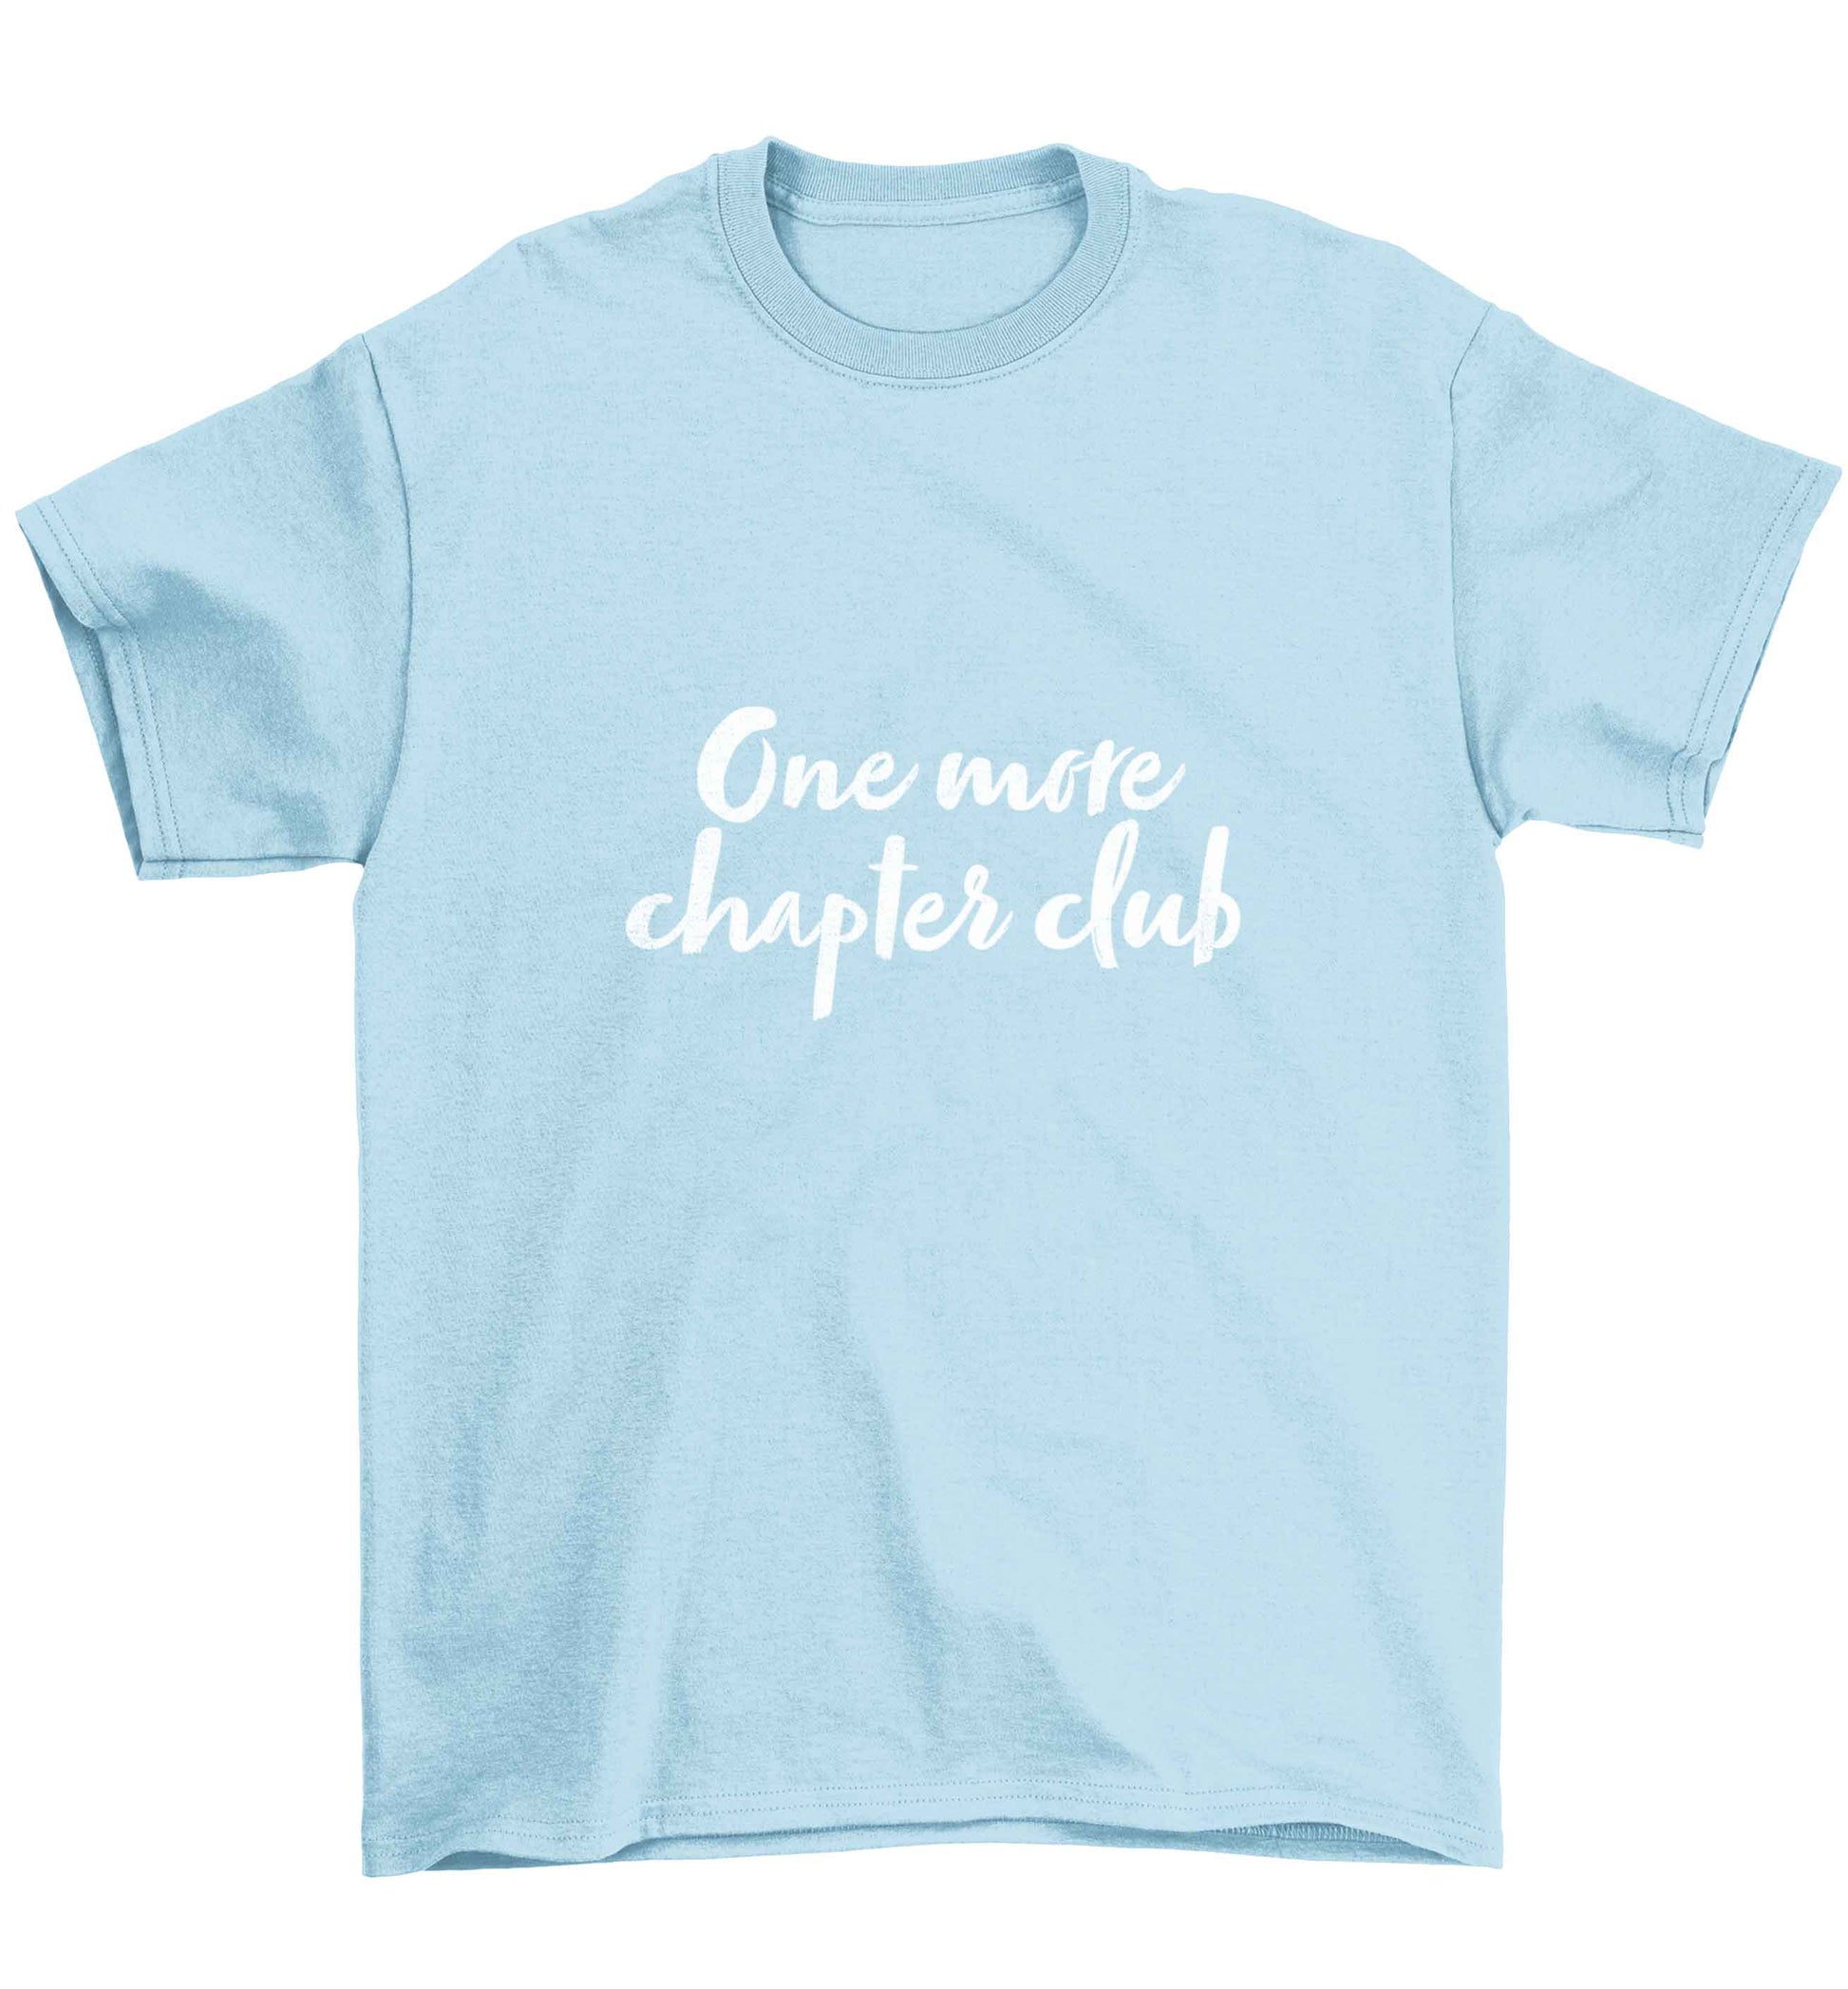 One more chapter club Kit Children's light blue Tshirt 12-13 Years